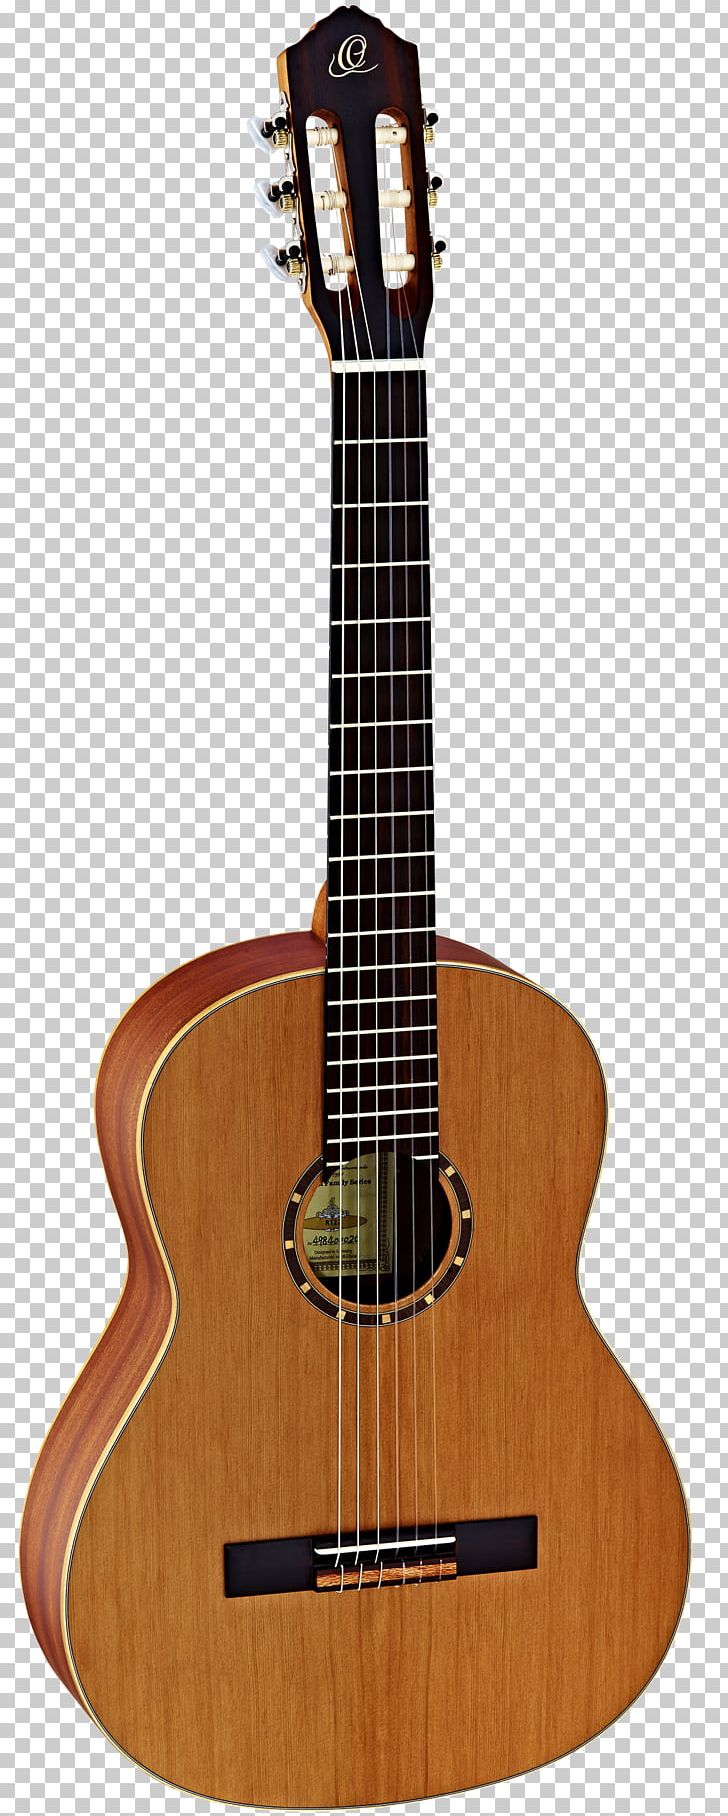 Taylor Guitars Steel-string Acoustic Guitar Classical Guitar Musical Instruments PNG, Clipart, Acoustic Electric Guitar, Amancio Ortega, Classical Guitar, Cuatro, Guitar Accessory Free PNG Download